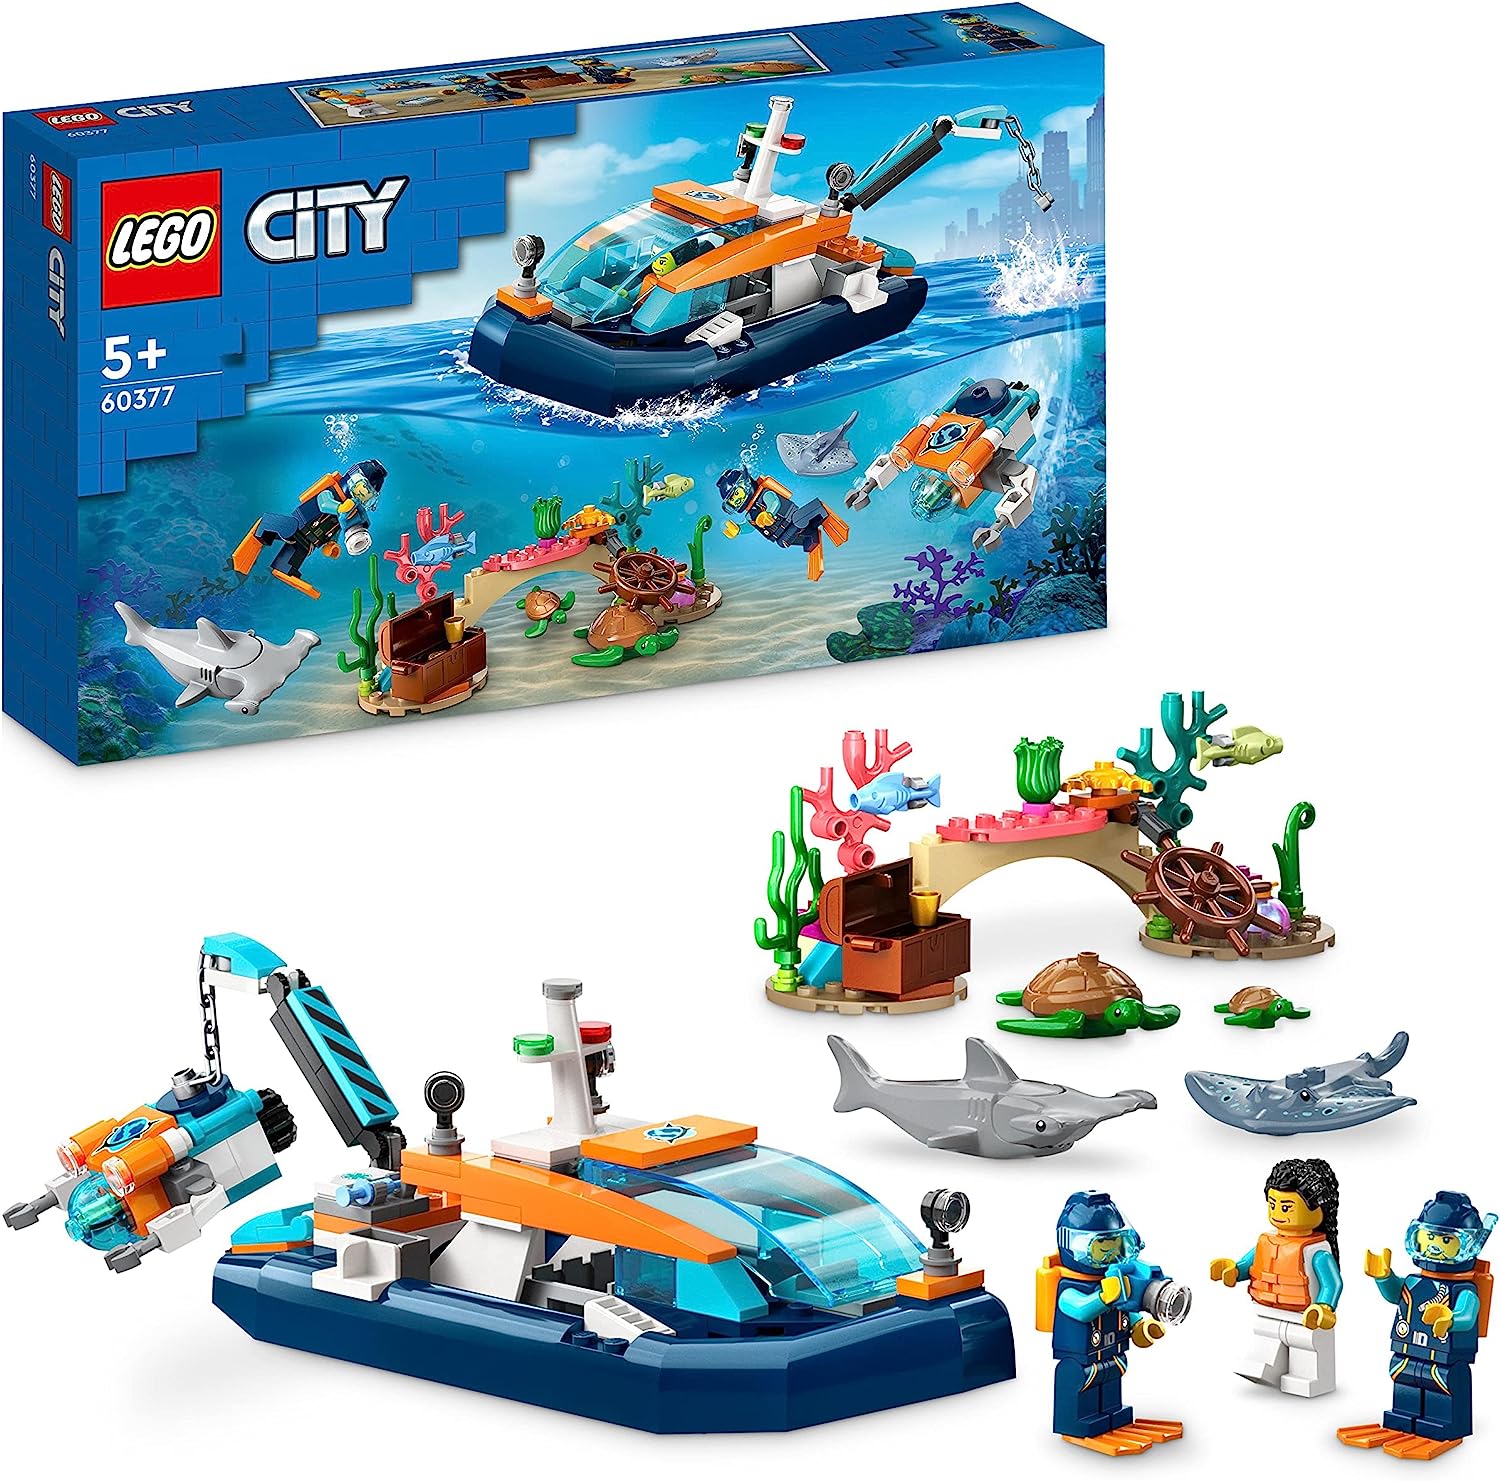 LEGO 60377 City Sea Explorer Boat Toy, Set Includes One Coral Reef, One Submarine, 3 Mini Figures and Mantaroons, Sharks, Crabs and 2 Turtles, Sea Animals Figures for Children from 5 years